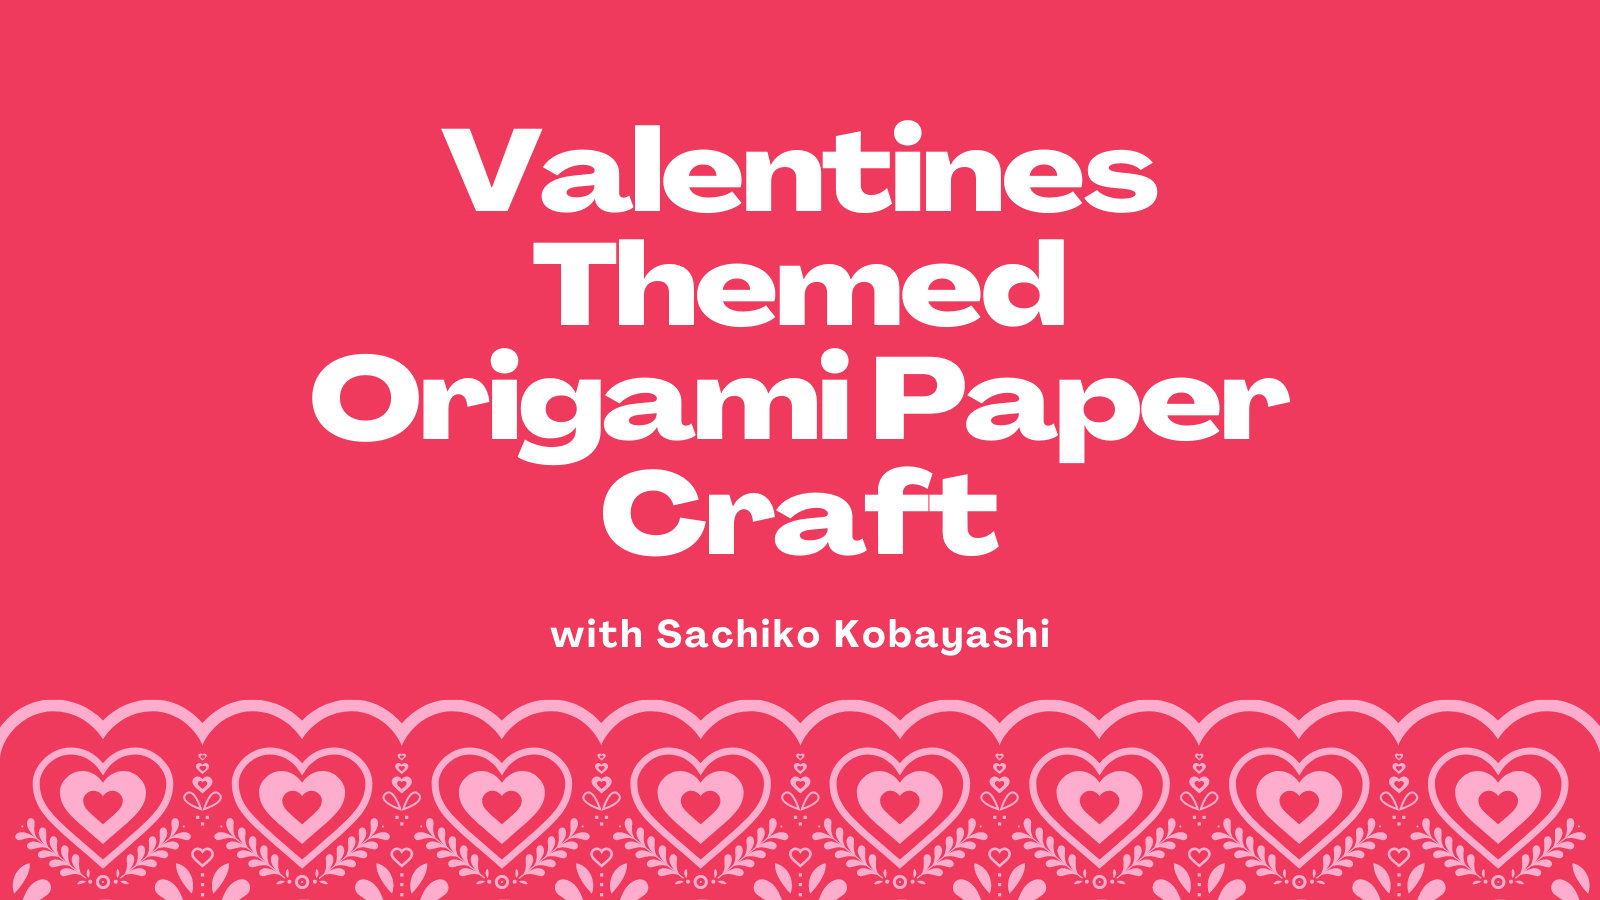 Valentines Themed Origami Paper Craft